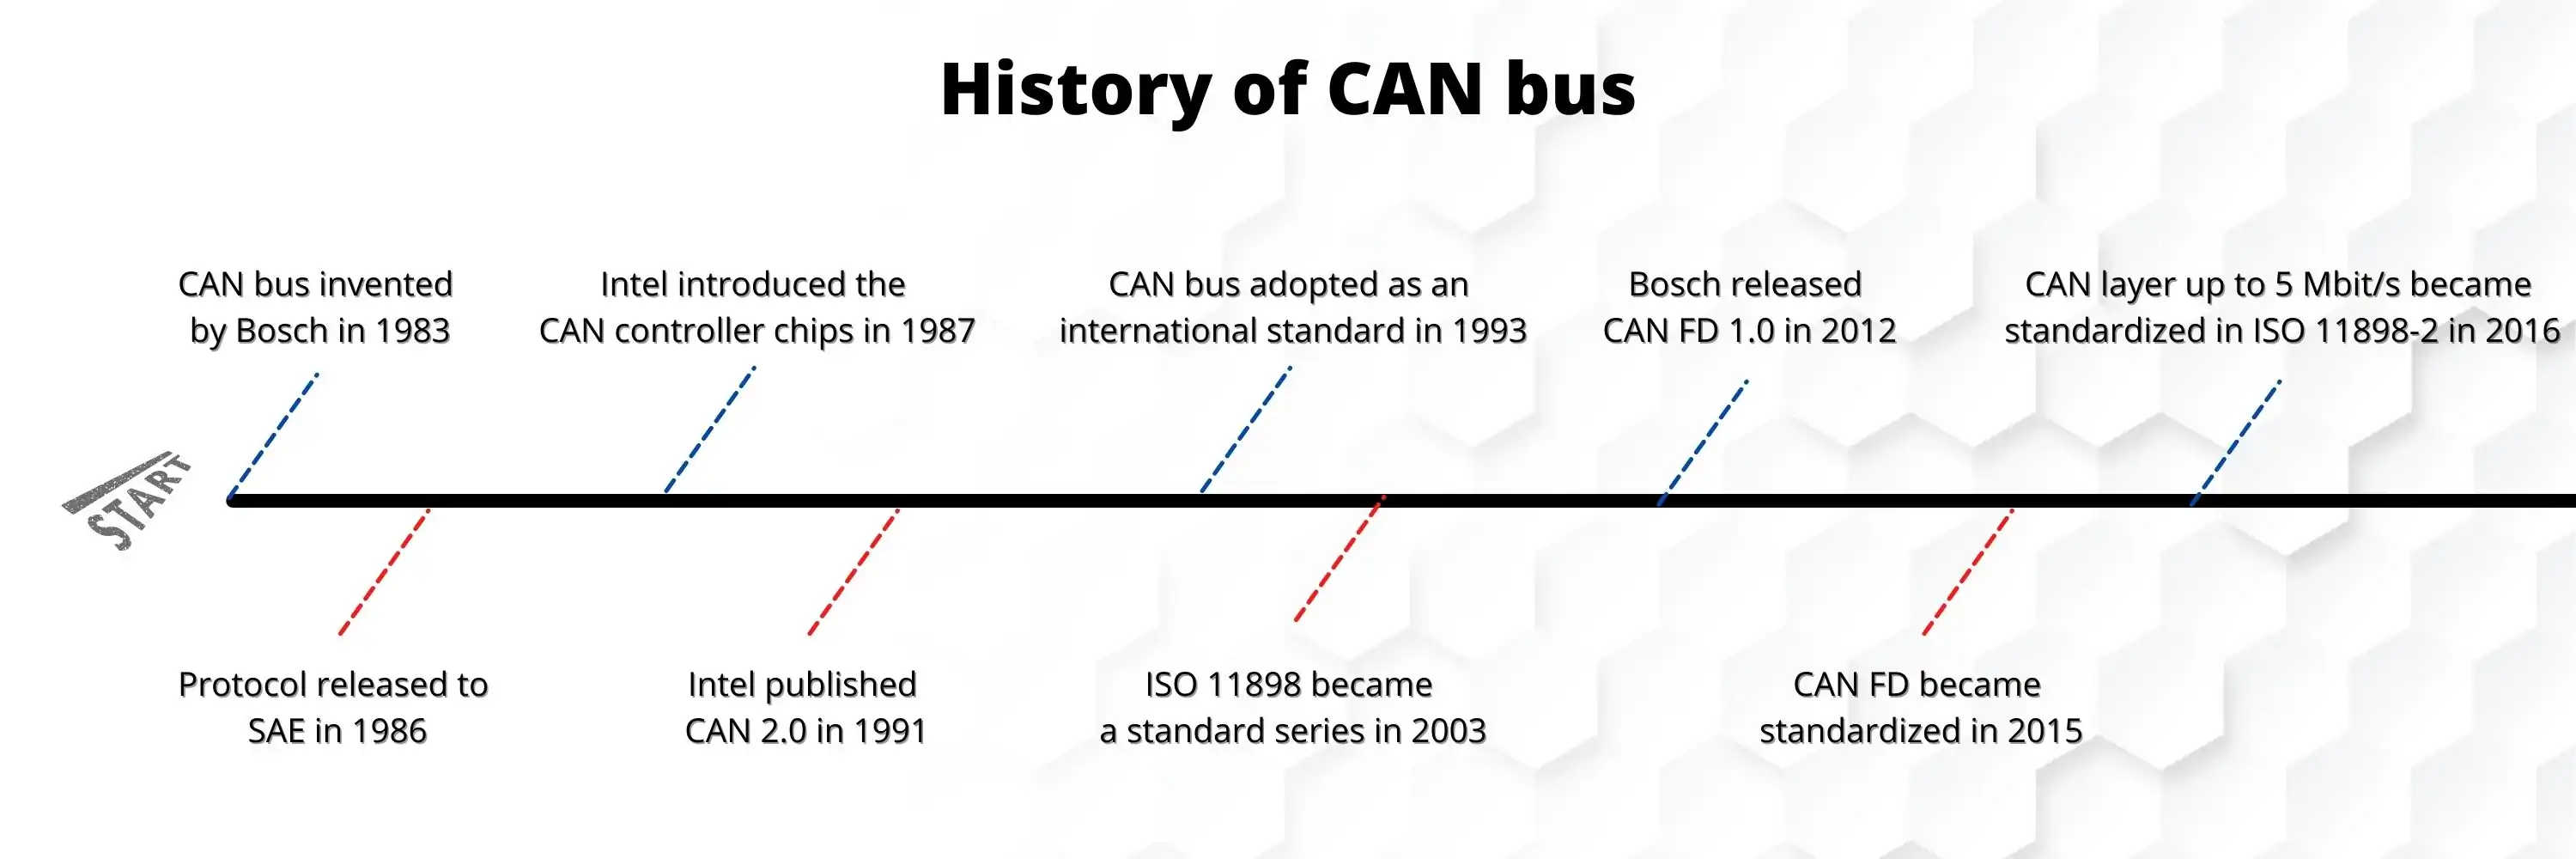 Timeline showing the history of CAN bus